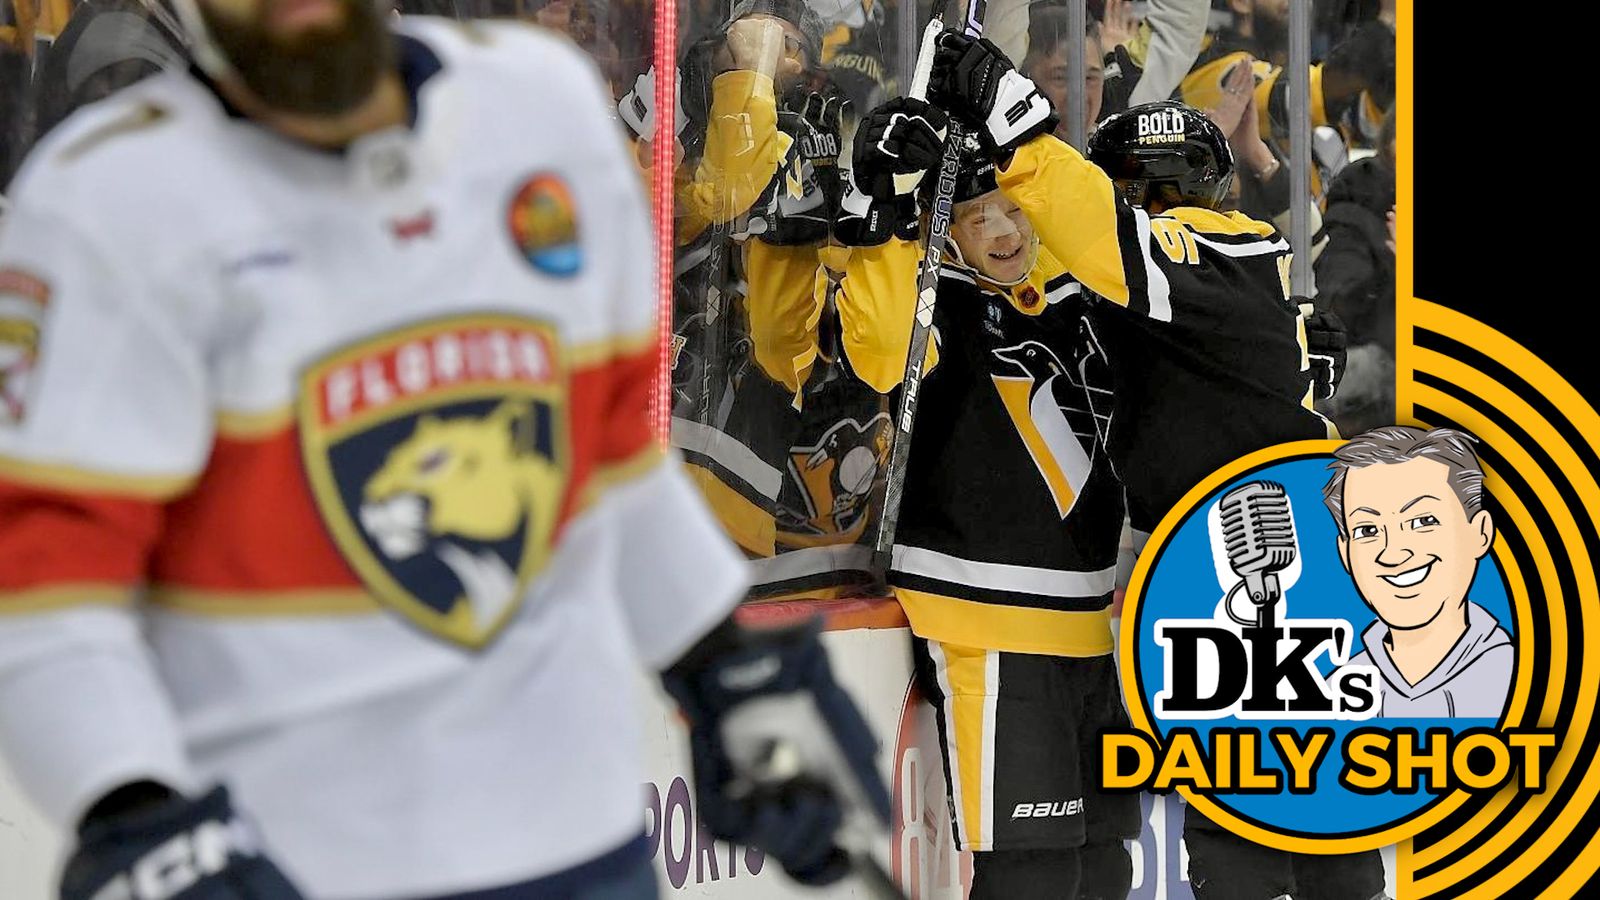 DK's Daily Shot of Penguins: Olympics? Yes and please!